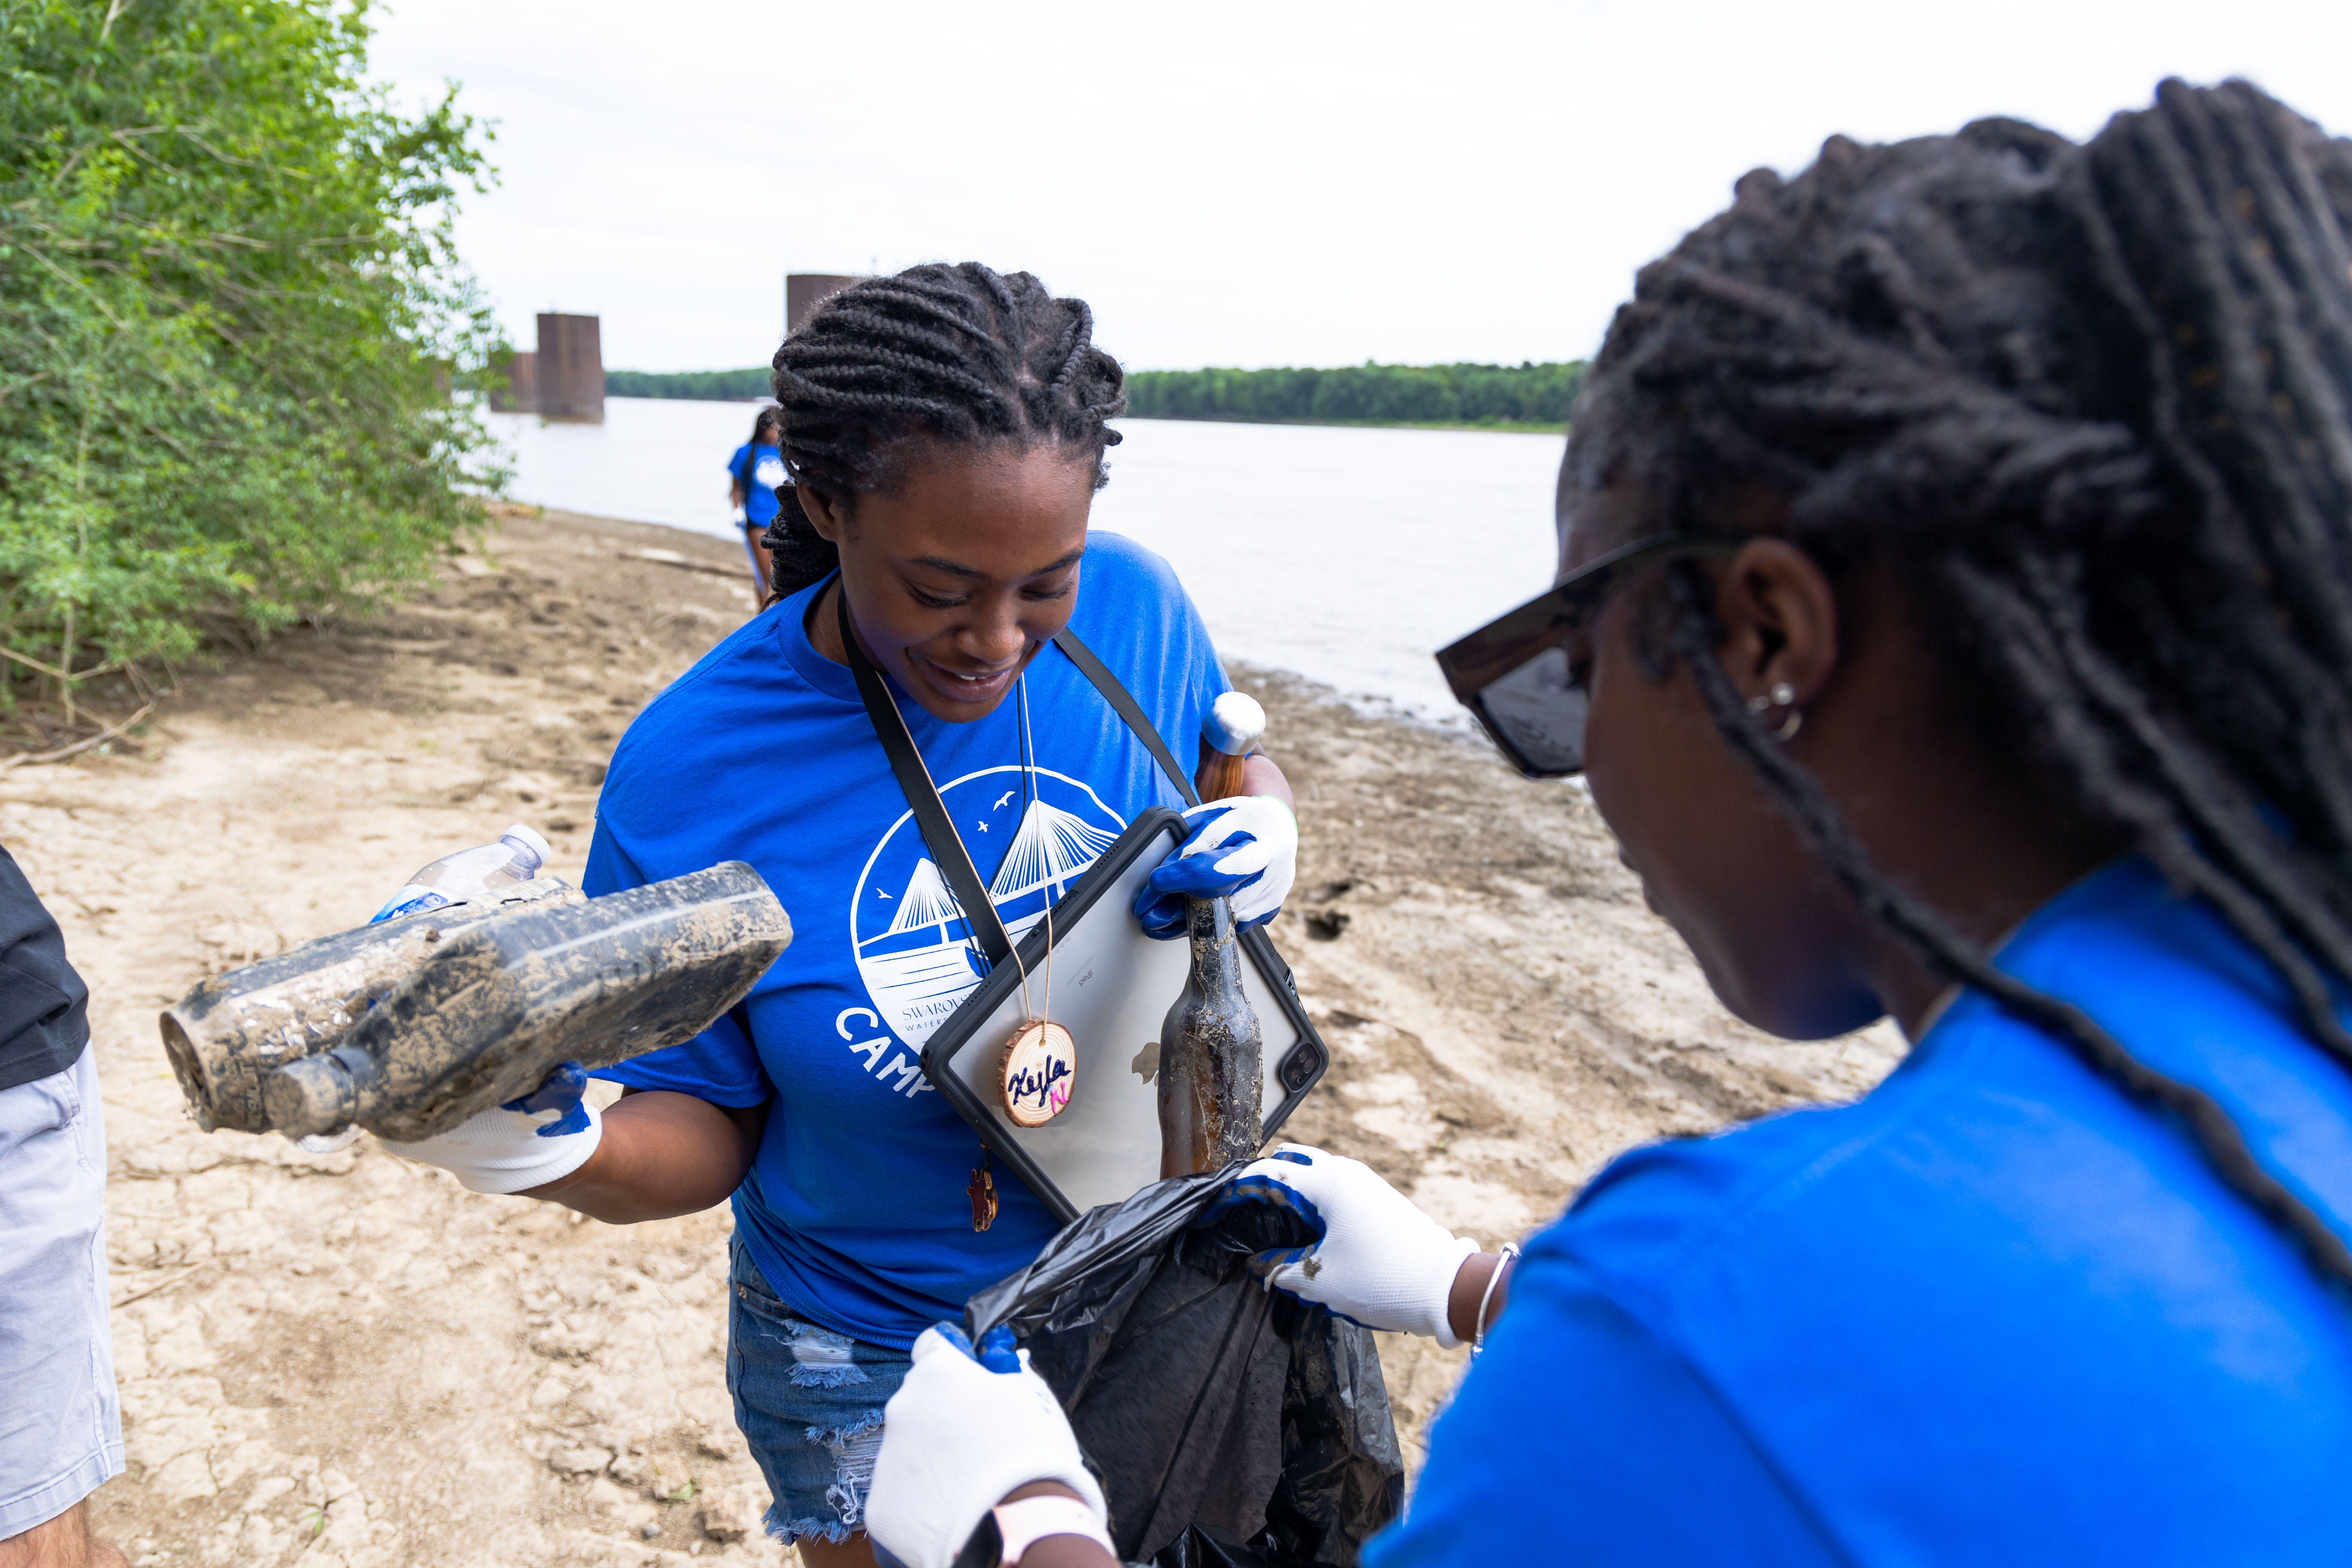 Cahokia High School Student Xyla Nixon cleans up trash along the Mississippi River during Camp Waterschool at the National Great Rivers Research and Education Center. Photo by Route 3 Films.